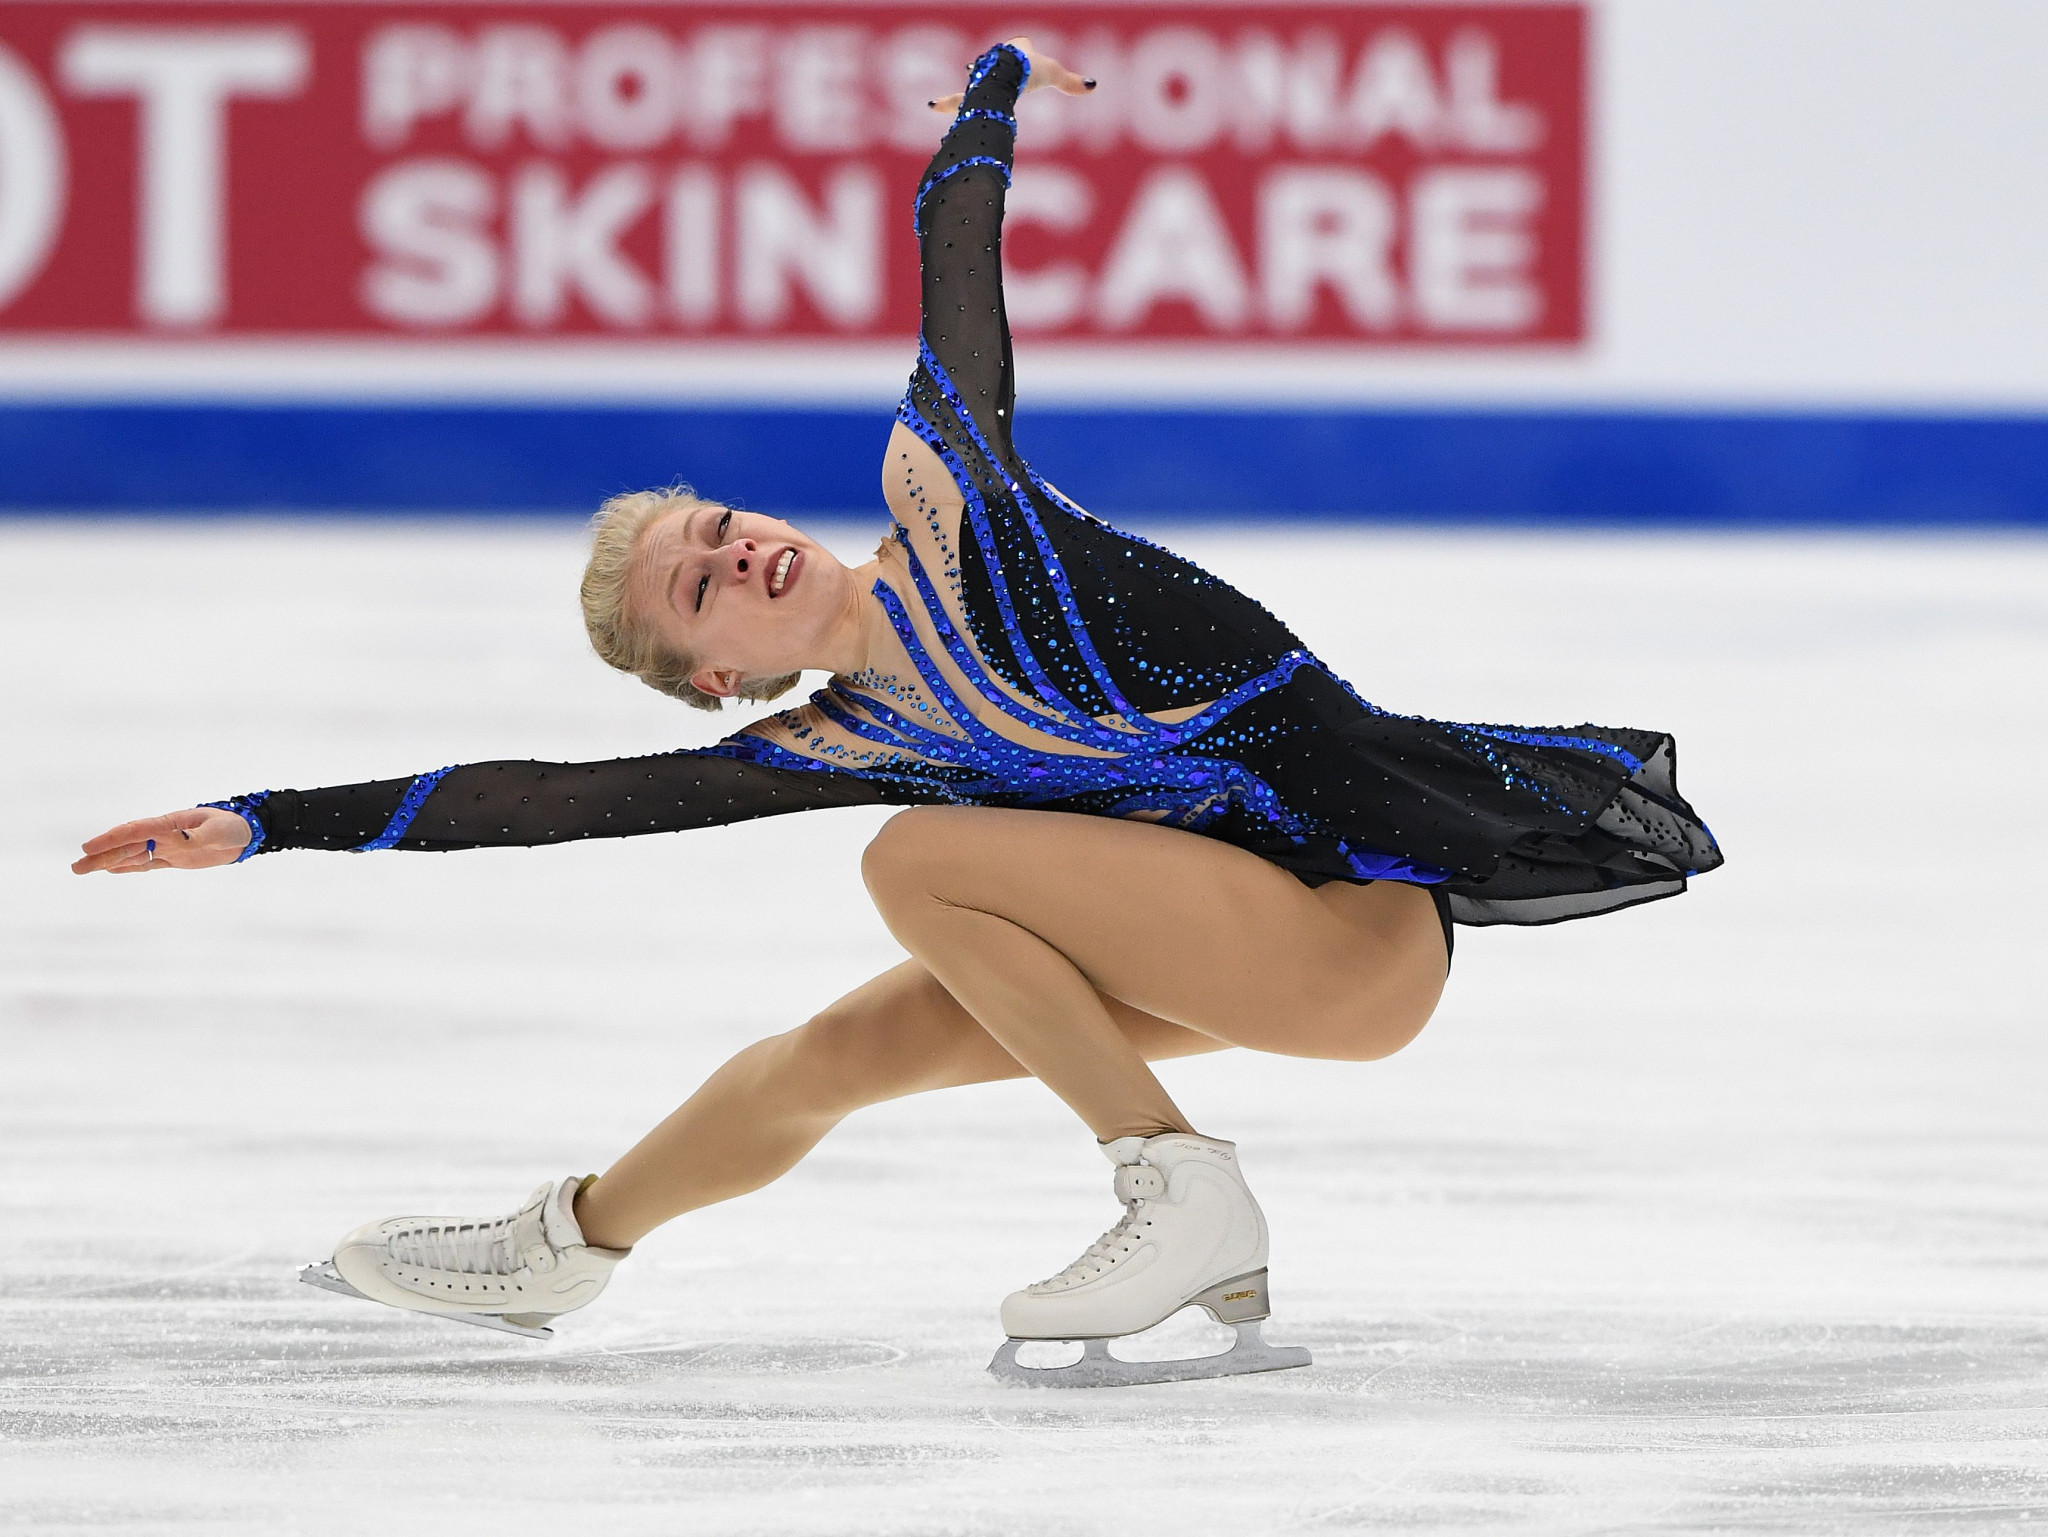 America's Bradie Tennell topped the women's short programme standings ©Getty Images